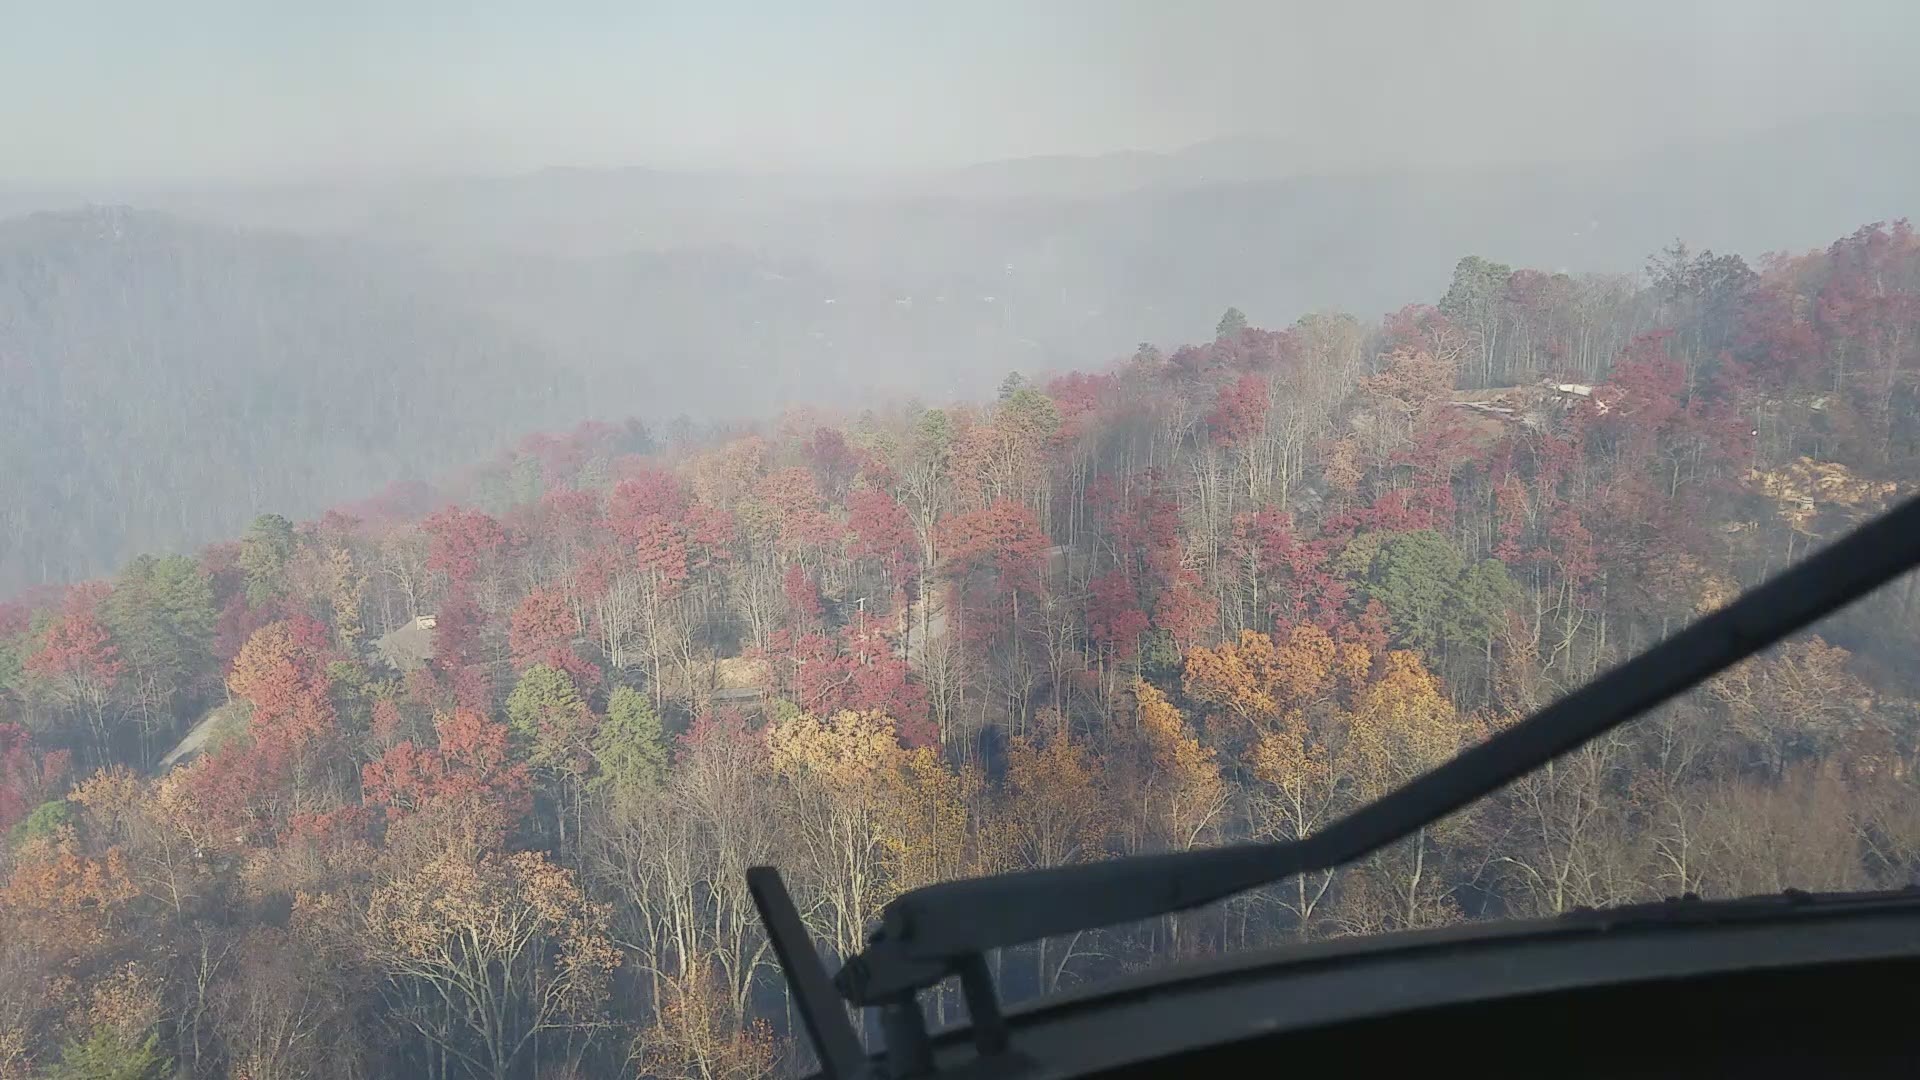 View from the cockpit of Black Hawk as pilots make bucket drops on structure/wildfire. Courtesy: Tennessee Army National Guard